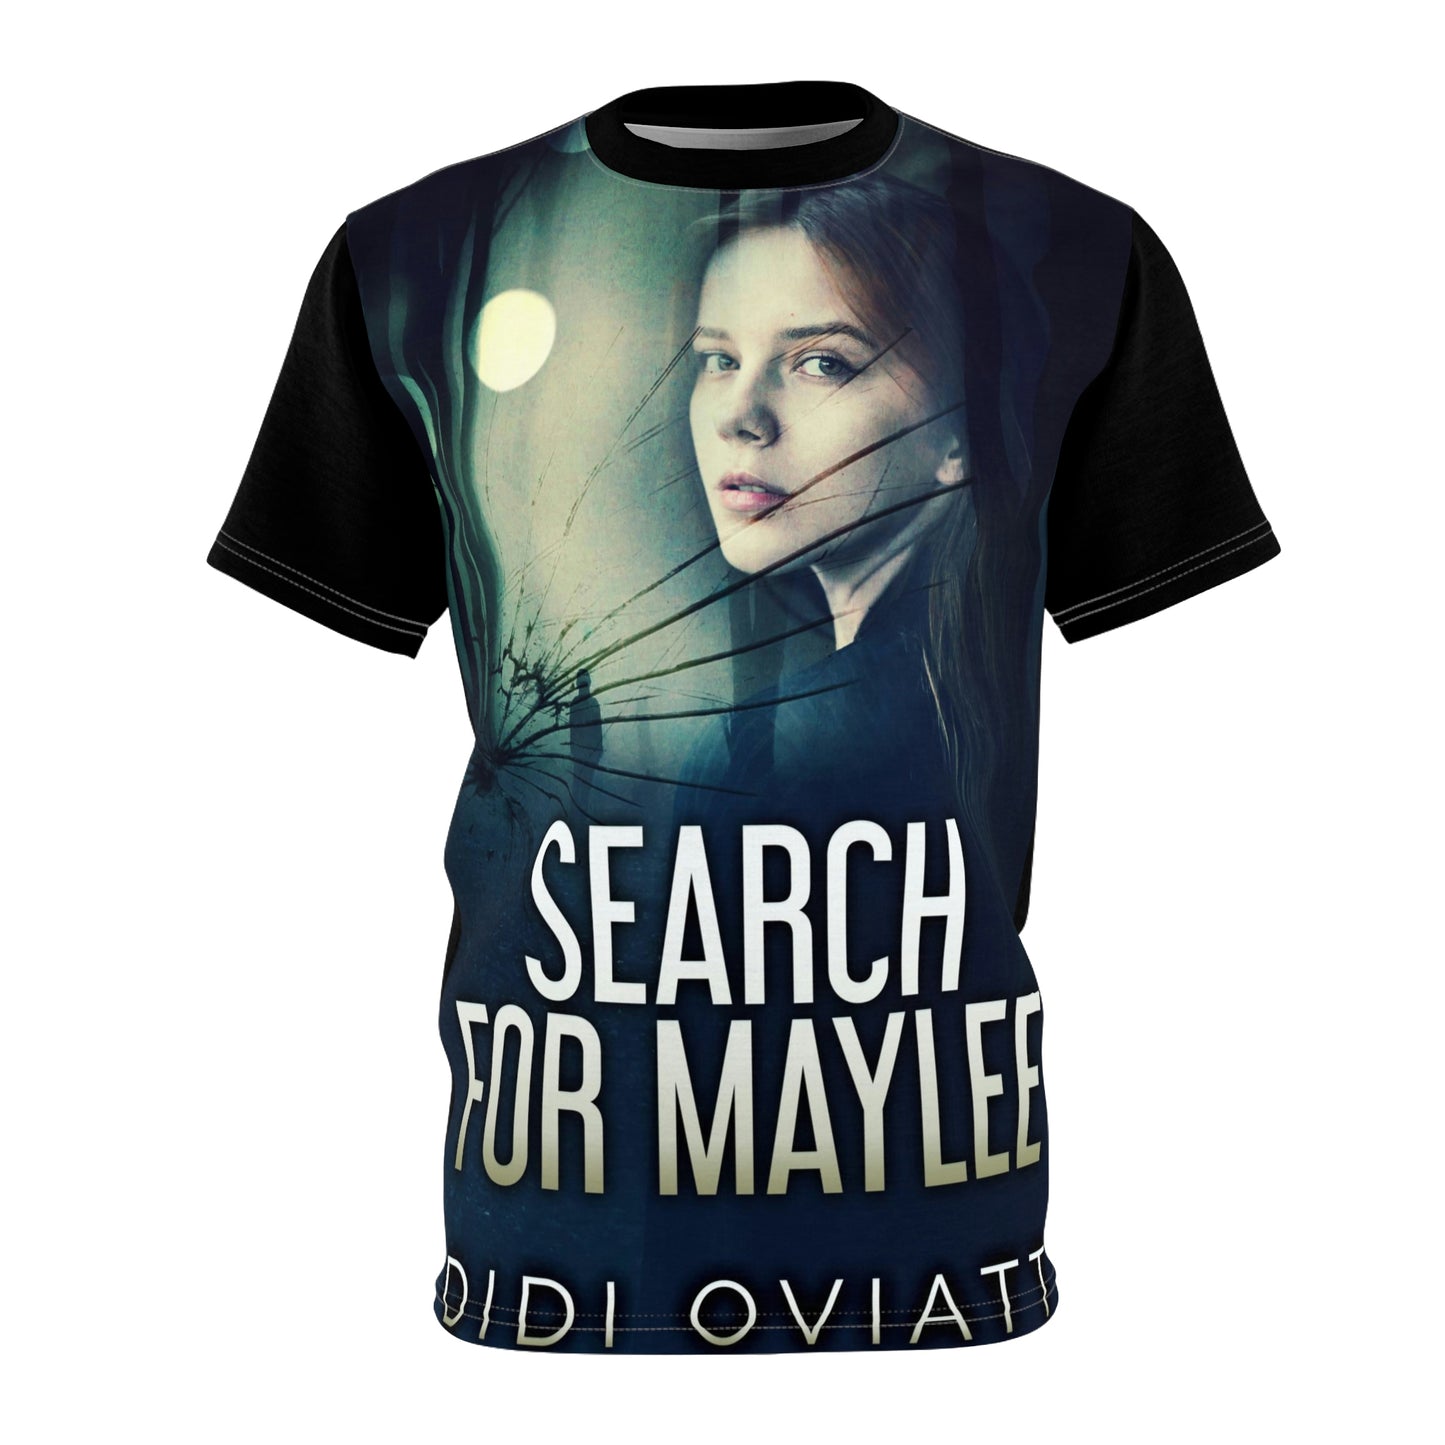 Search for Maylee - Unisex All-Over Print Cut & Sew T-Shirt